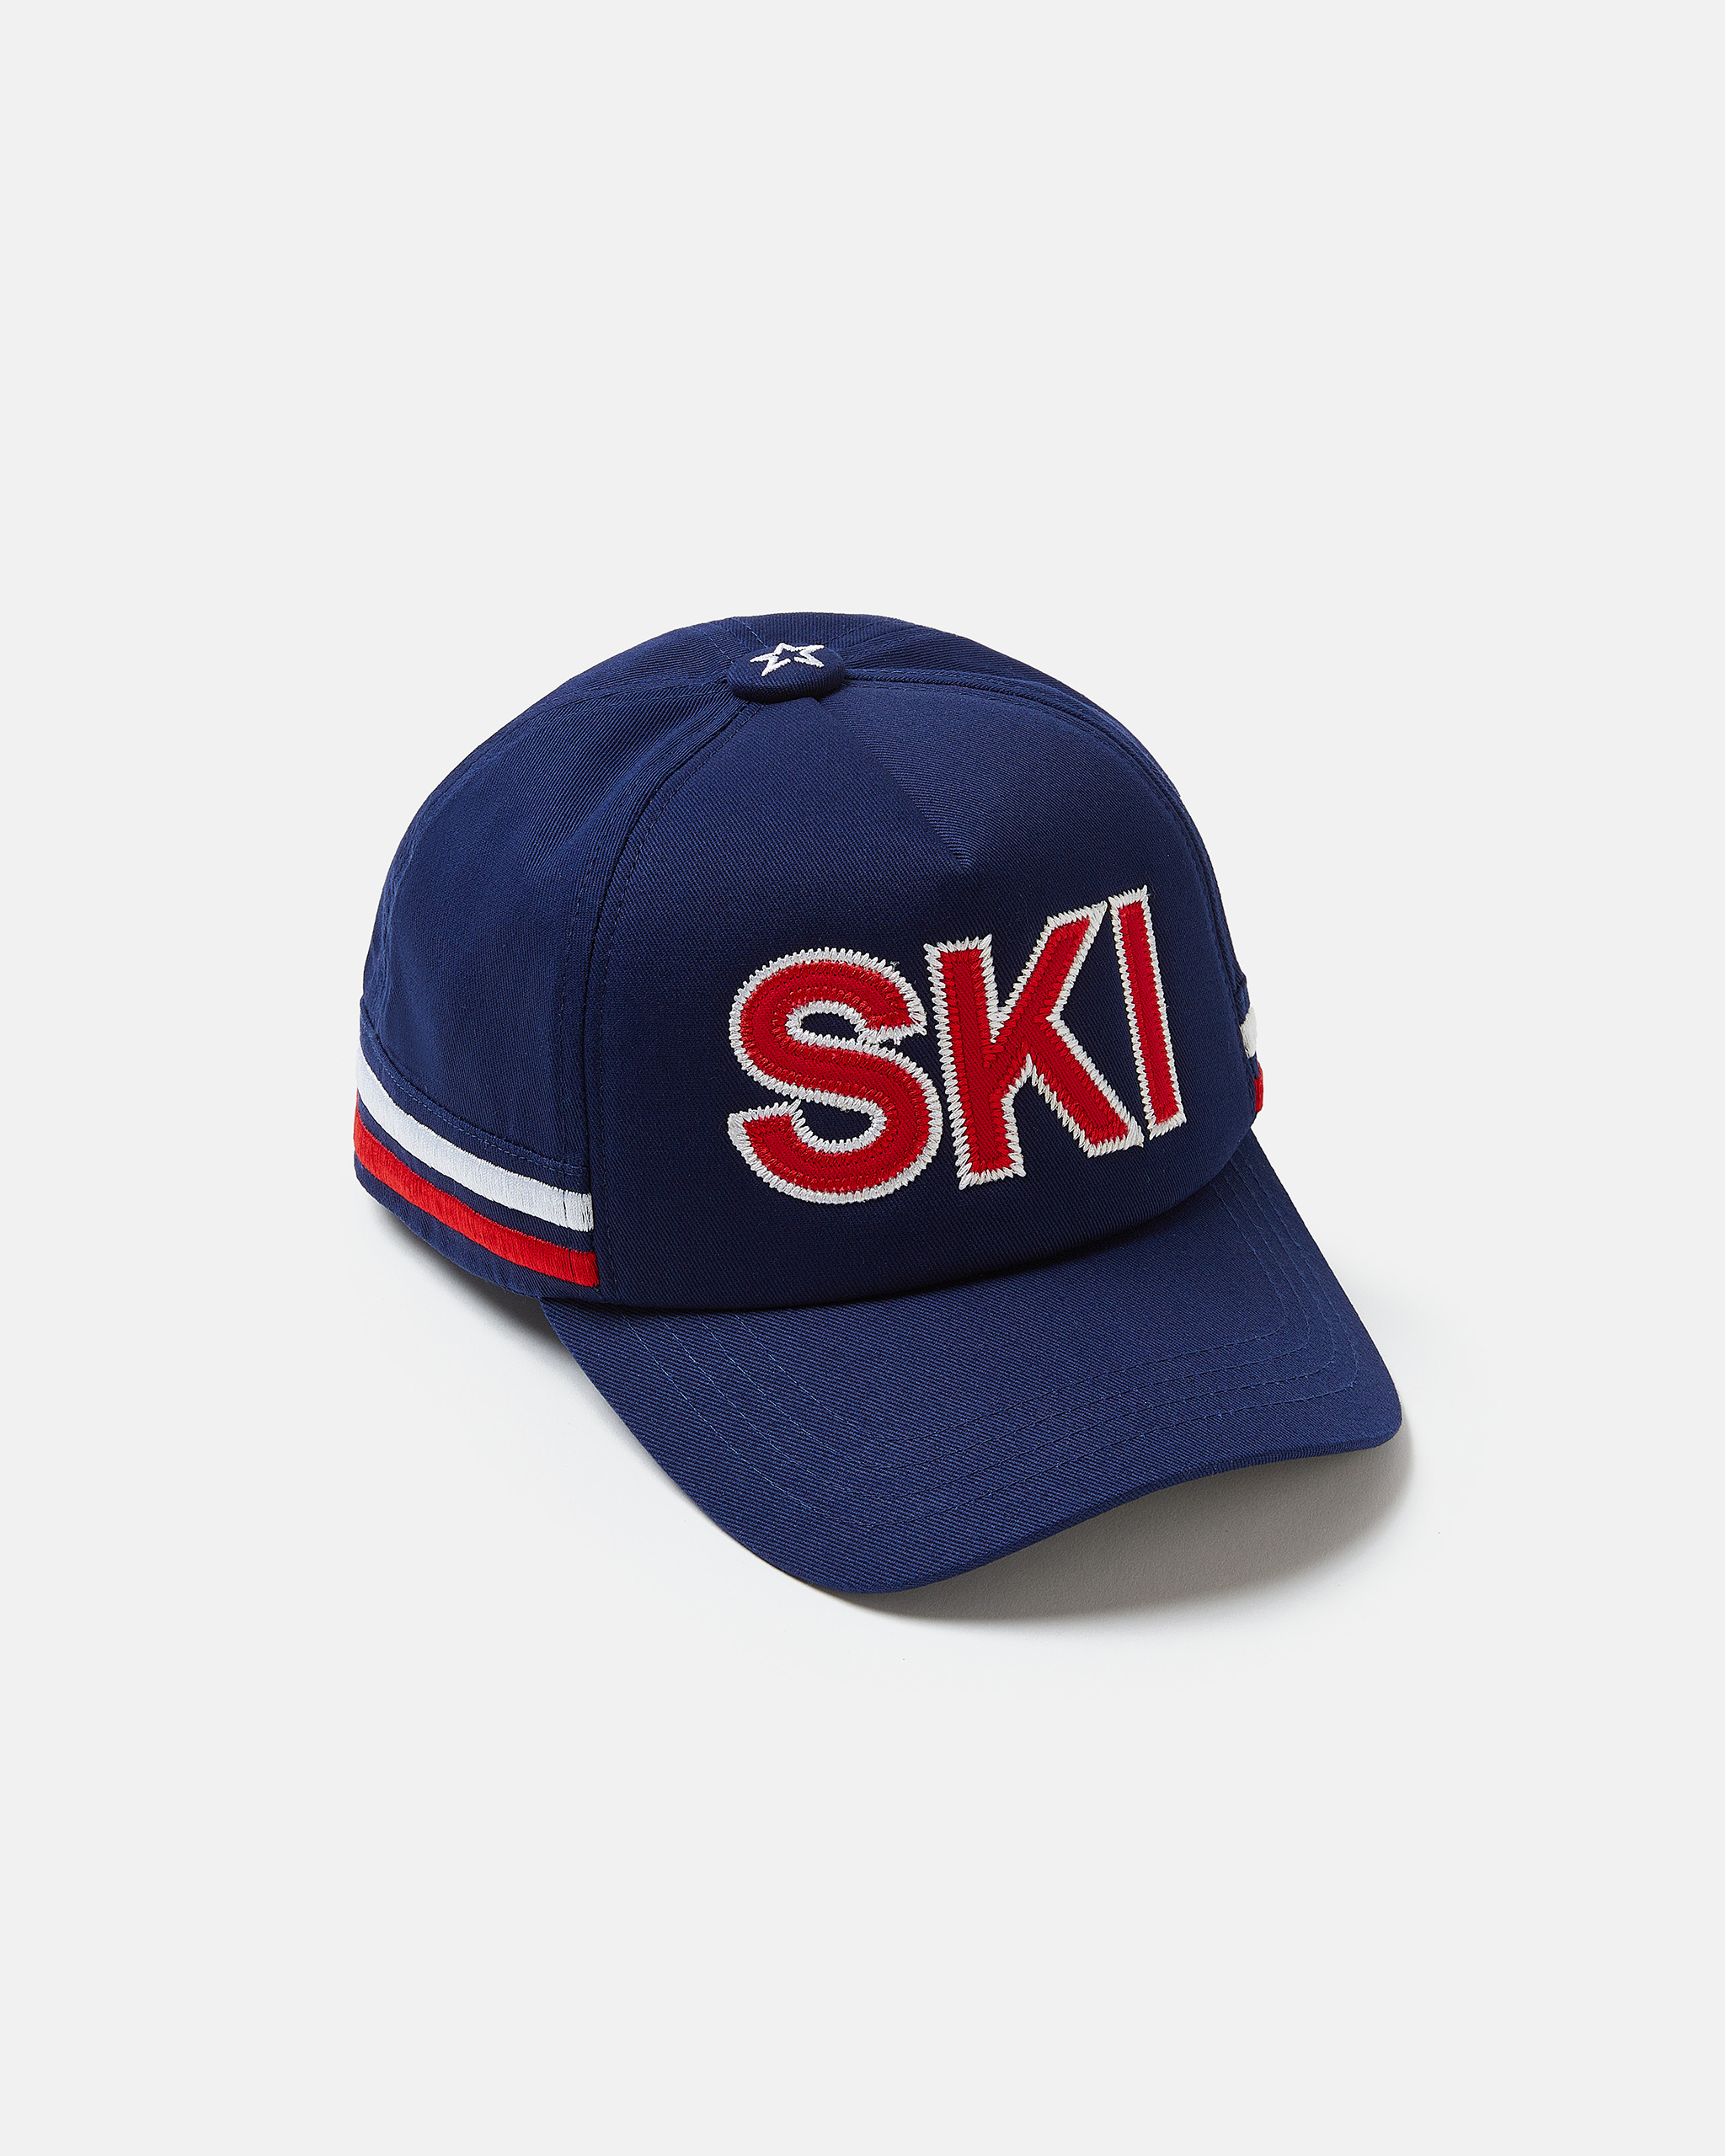 Perfect Moment Pm Ski Cap In Navy-white-red